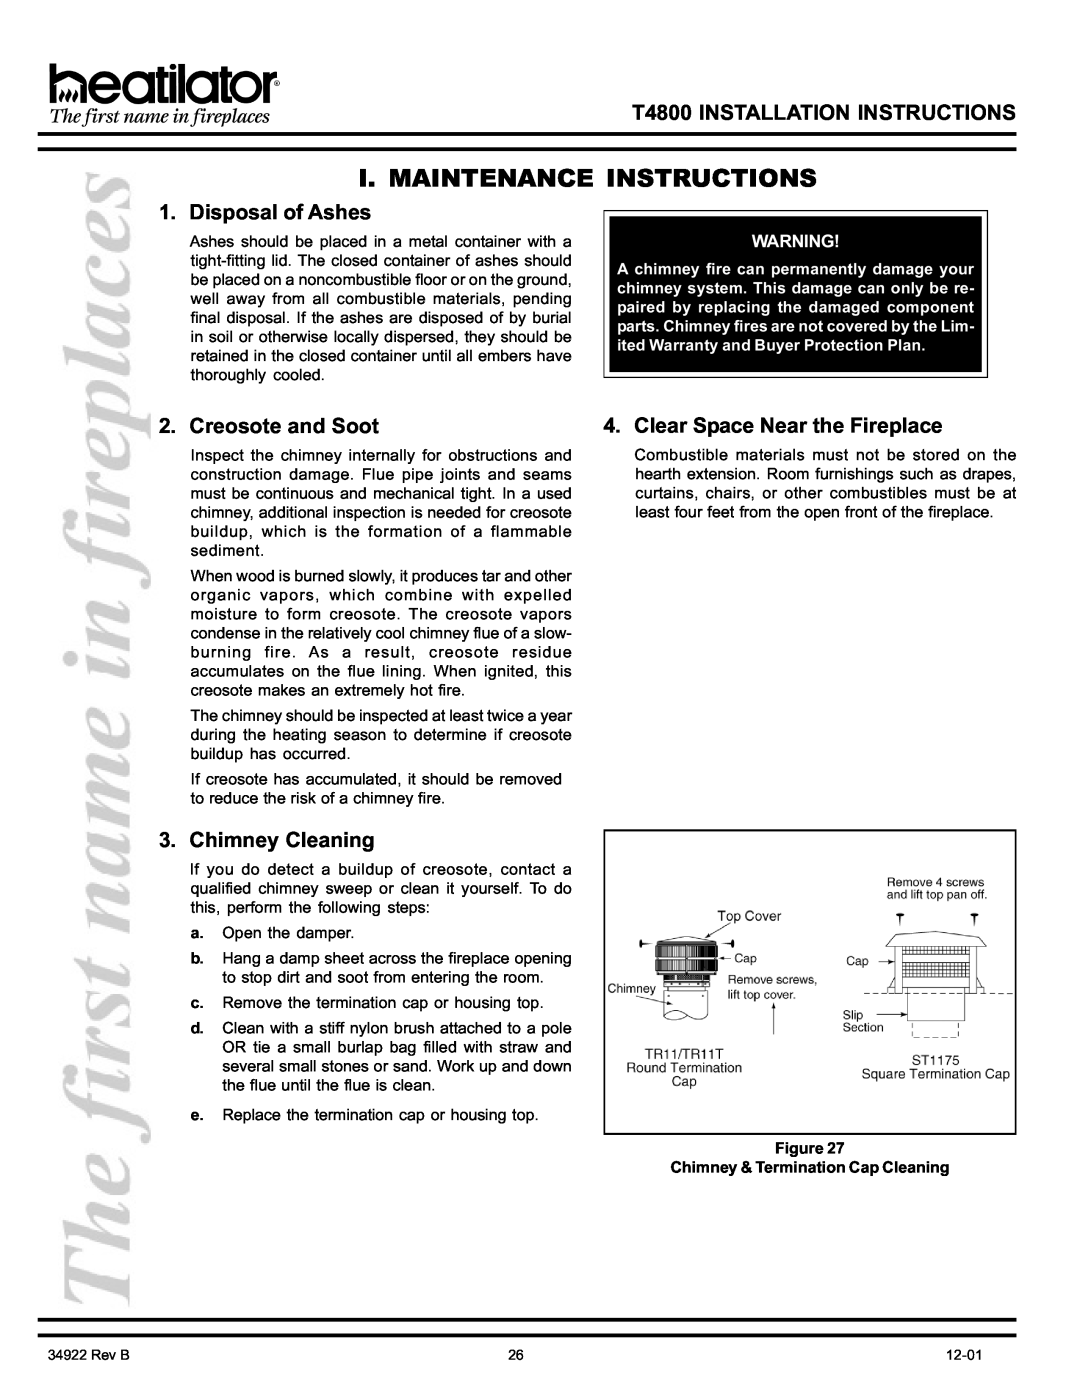 Heatiator T4800 manual I. Maintenance Instructions, Disposal of Ashes, Creosote and Soot, Chimney Cleaning 